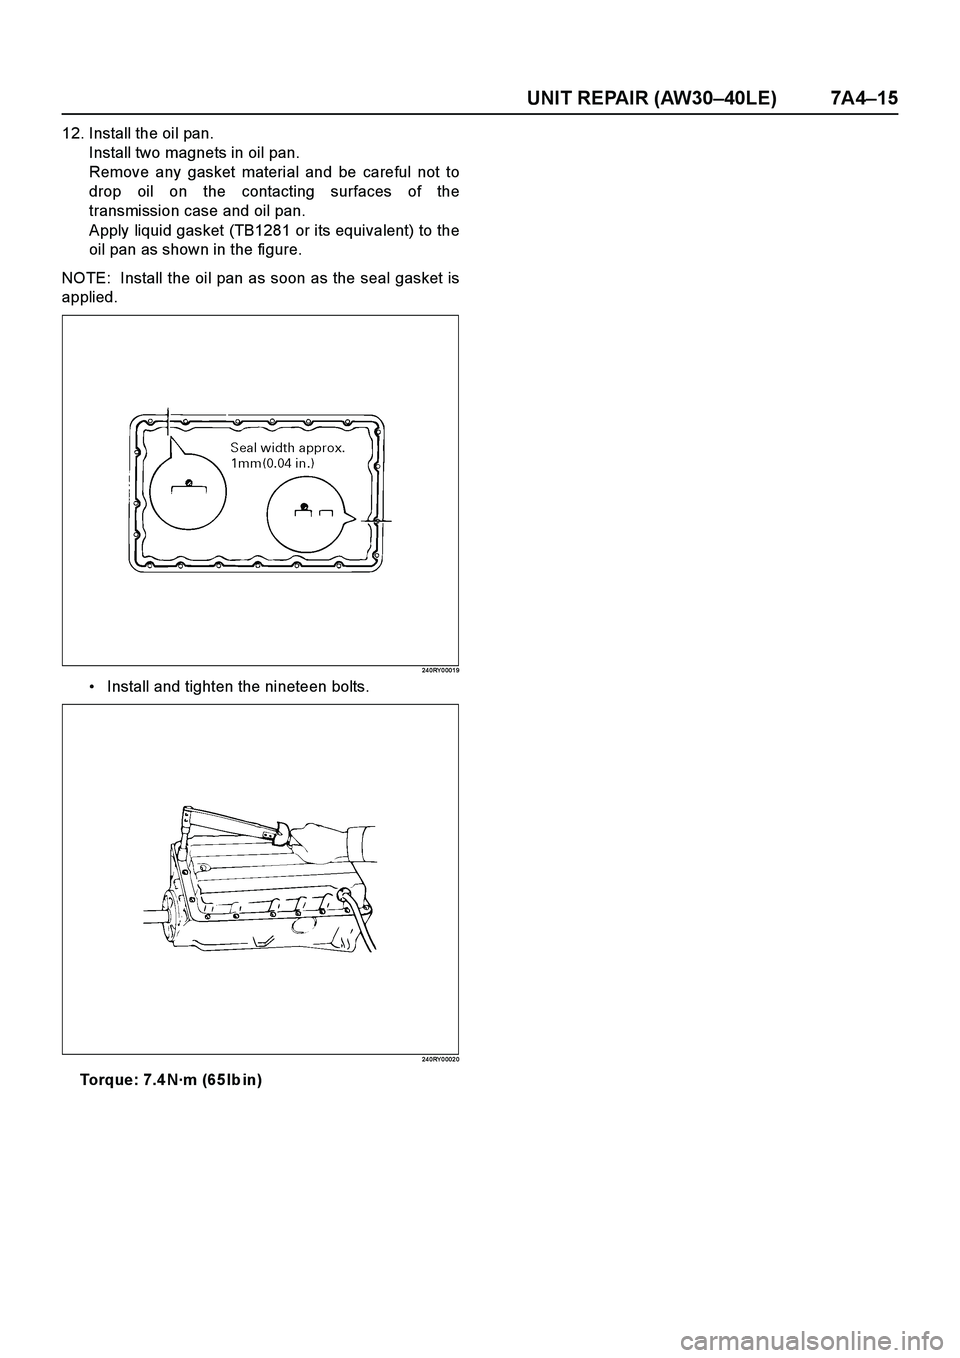 ISUZU TF SERIES 2004  Workshop Manual UNIT REPAIR (AW30–40LE) 7A4–15
12. Install the oil pan.
Install two magnets in oil pan.
Remove any gasket material and be careful not to
drop oil on the contacting surfaces of the
transmission cas